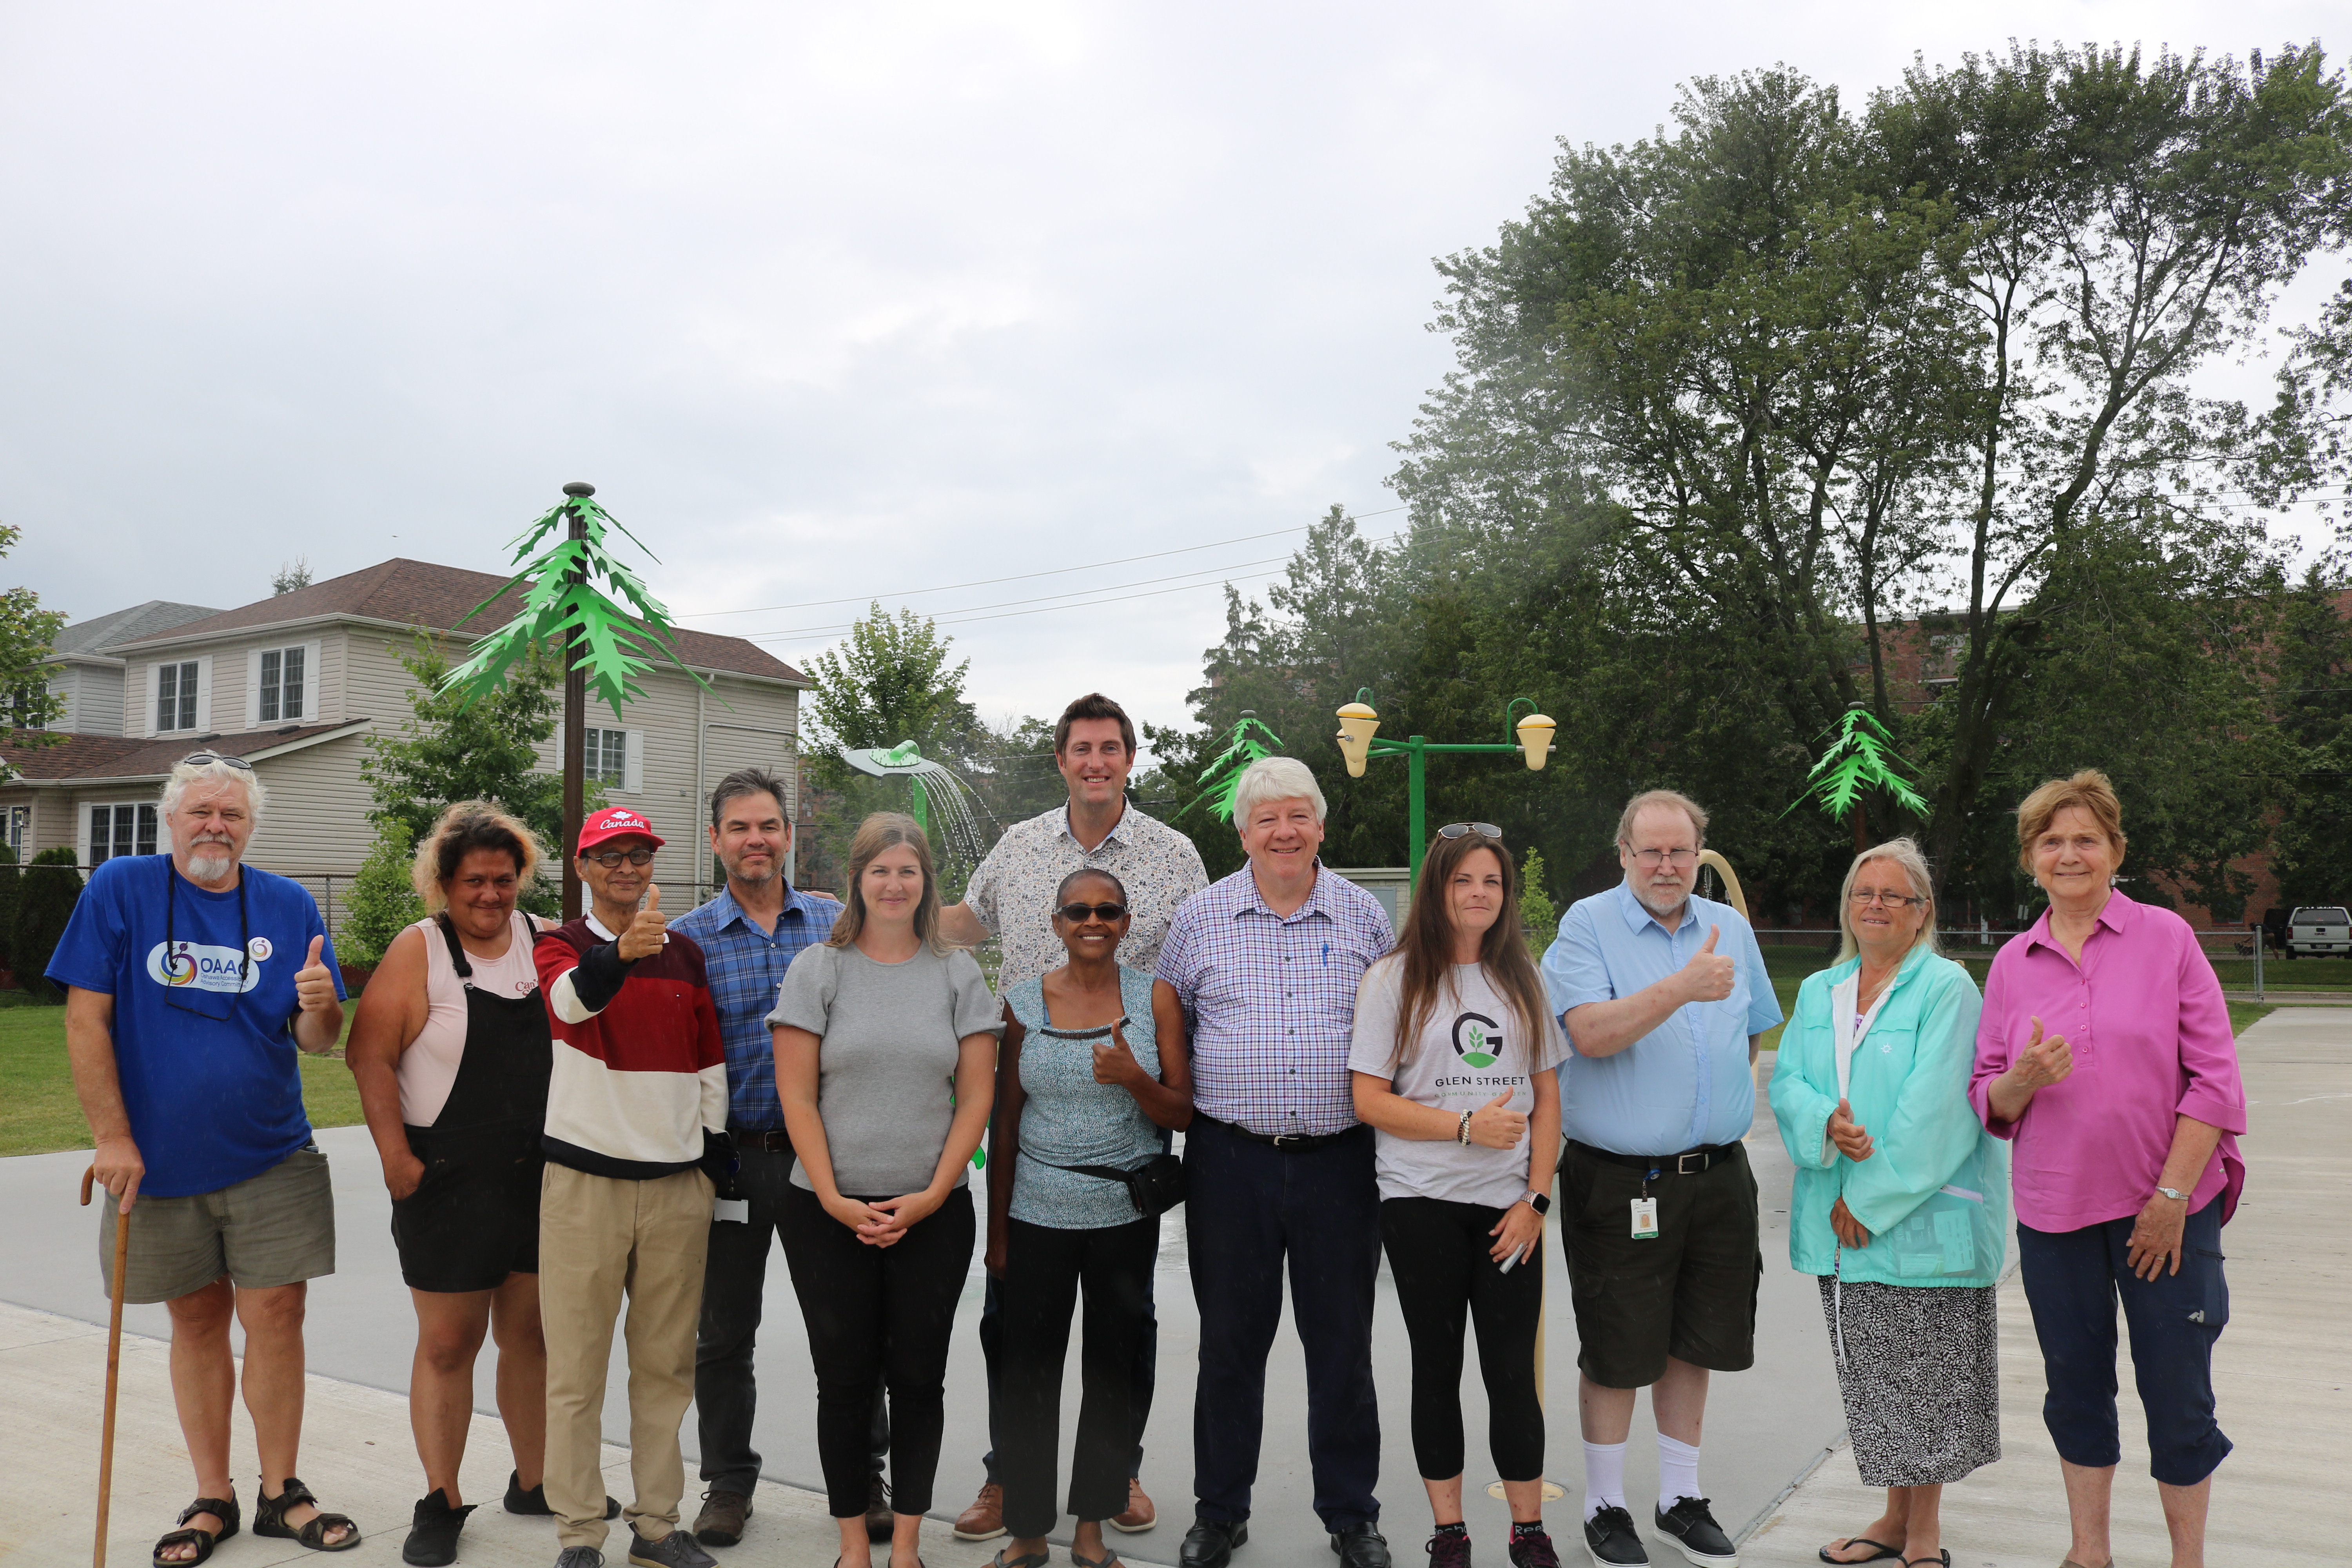 Ryan Turnbull, Member of Parliament for Whitby, on behalf of the Honourable Sean Fraser, Minister of Housing, Infrastructure and Communities, with members of Oshawa City Council and neighbourhood residents, stand in front of the new splashpad at Cordova Valley Park